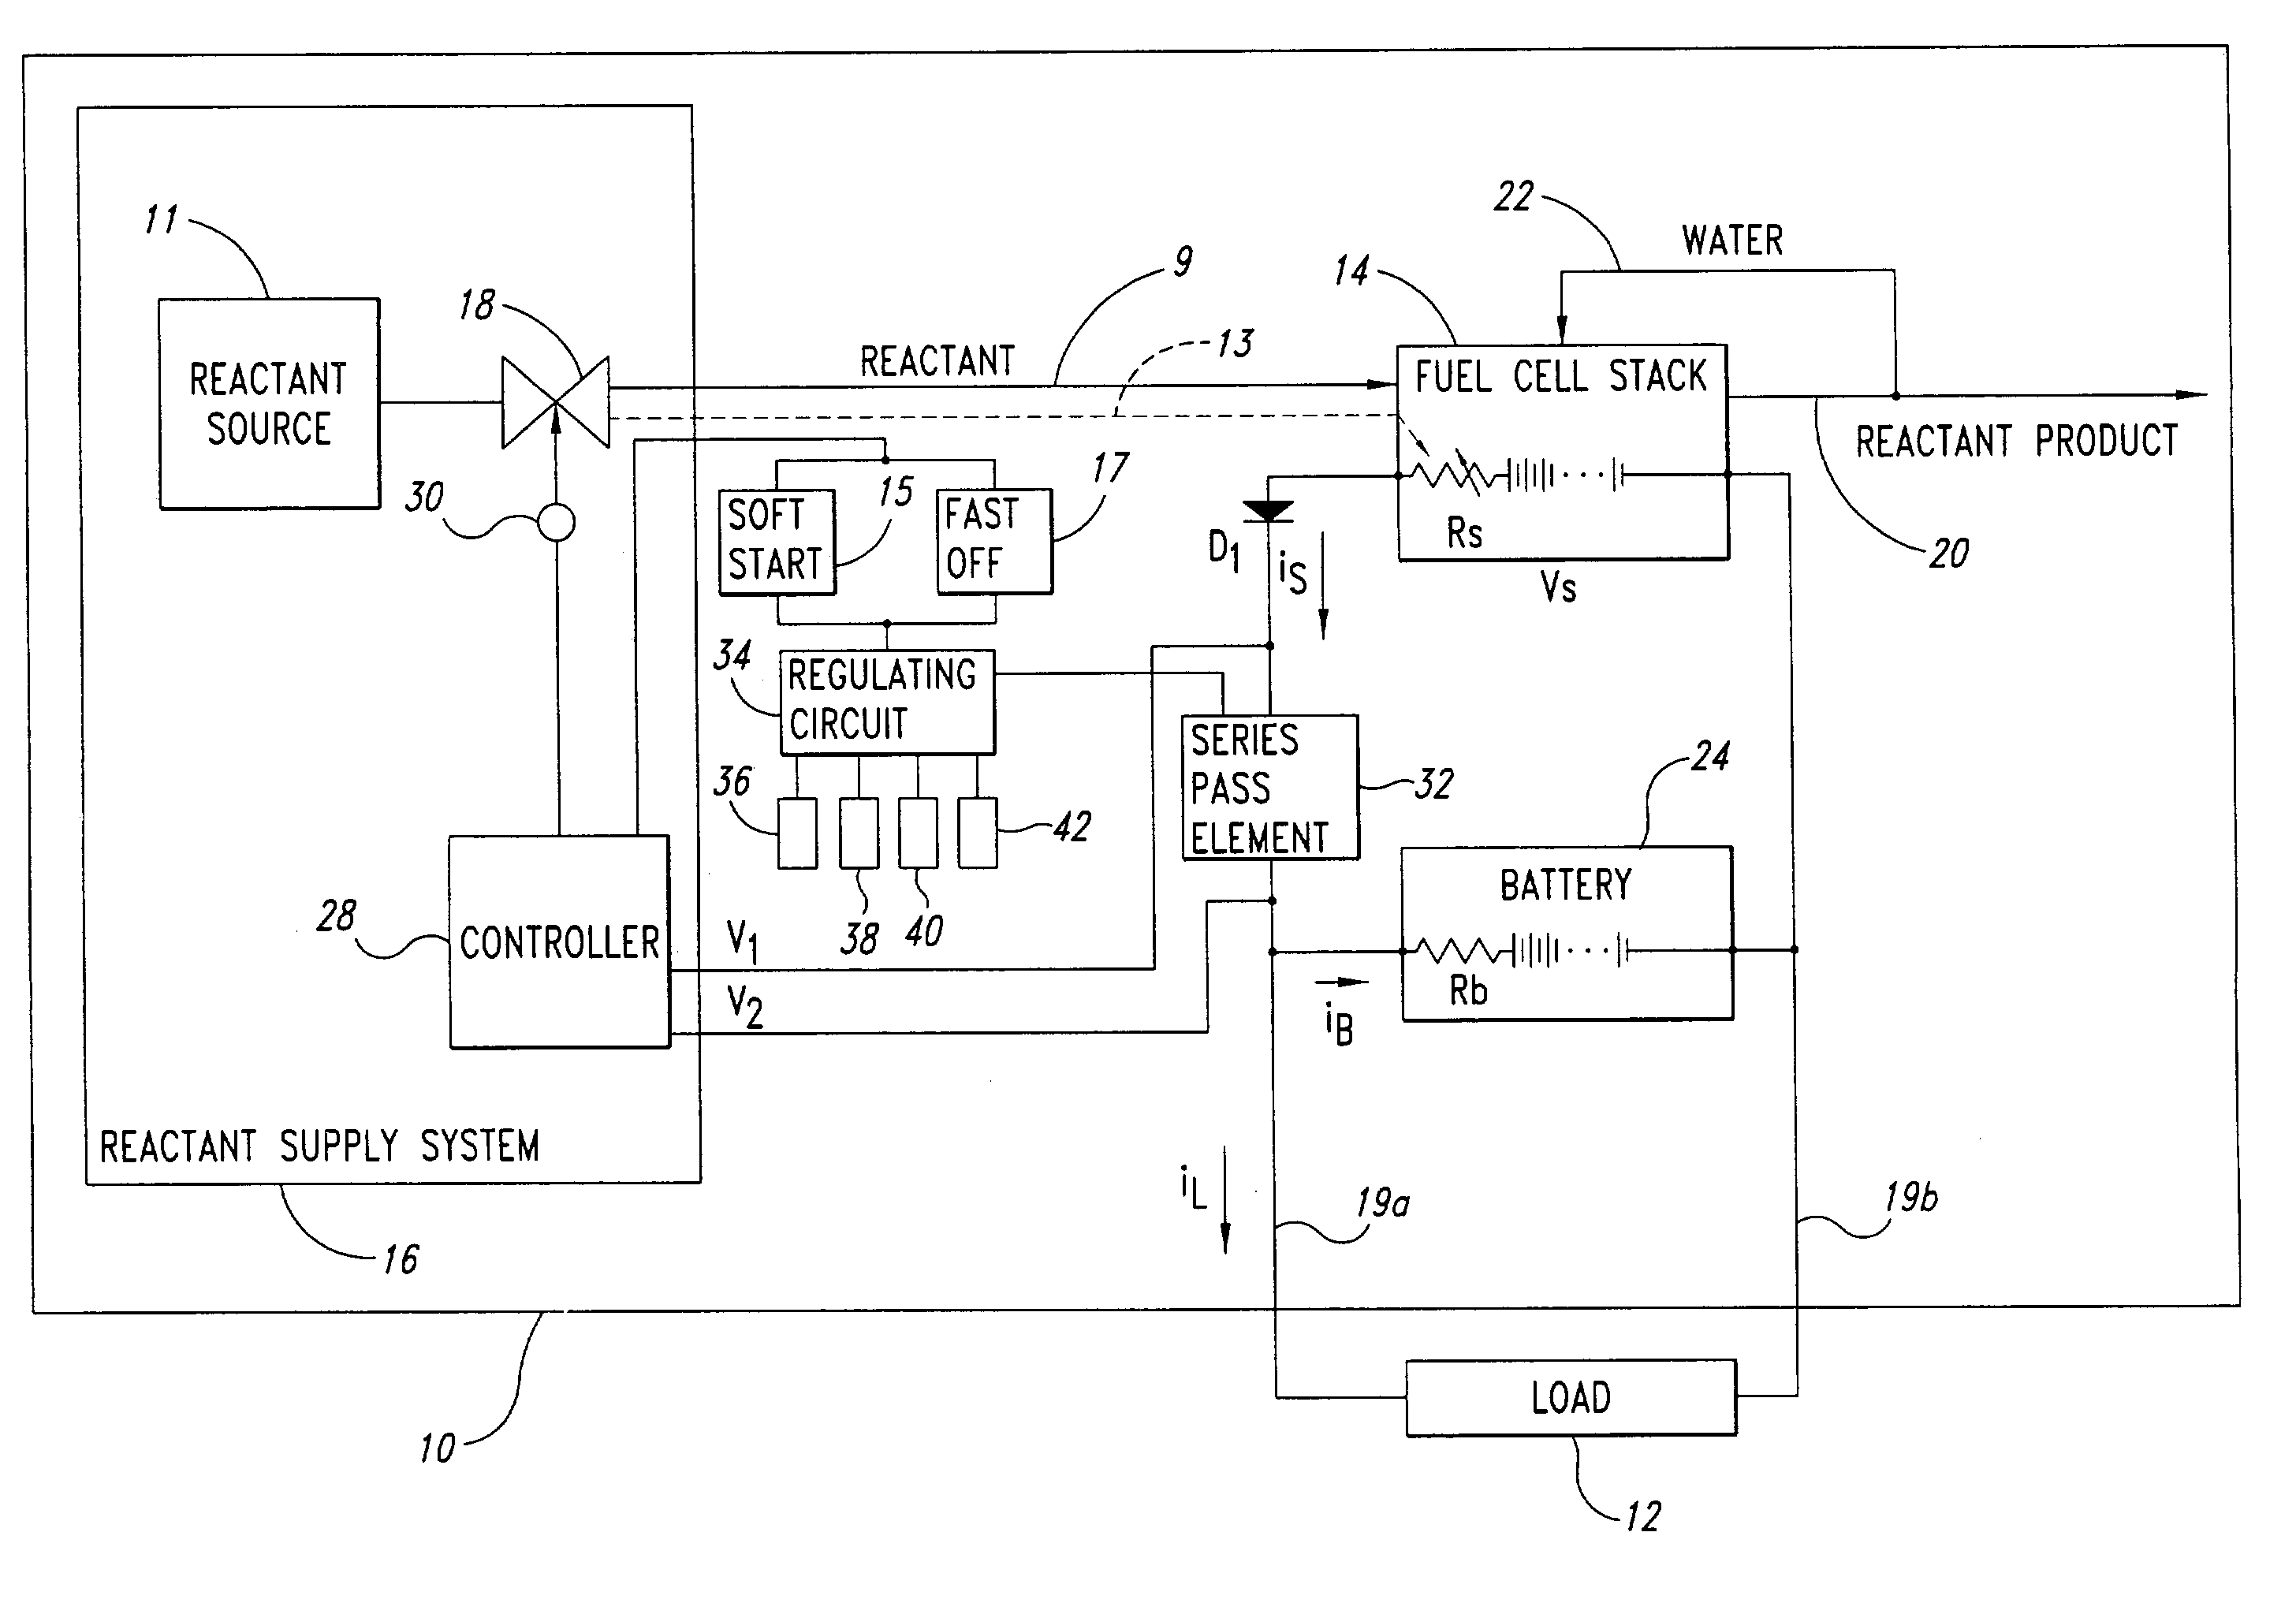 Electric power plant with adjustable array of fuel cell systems